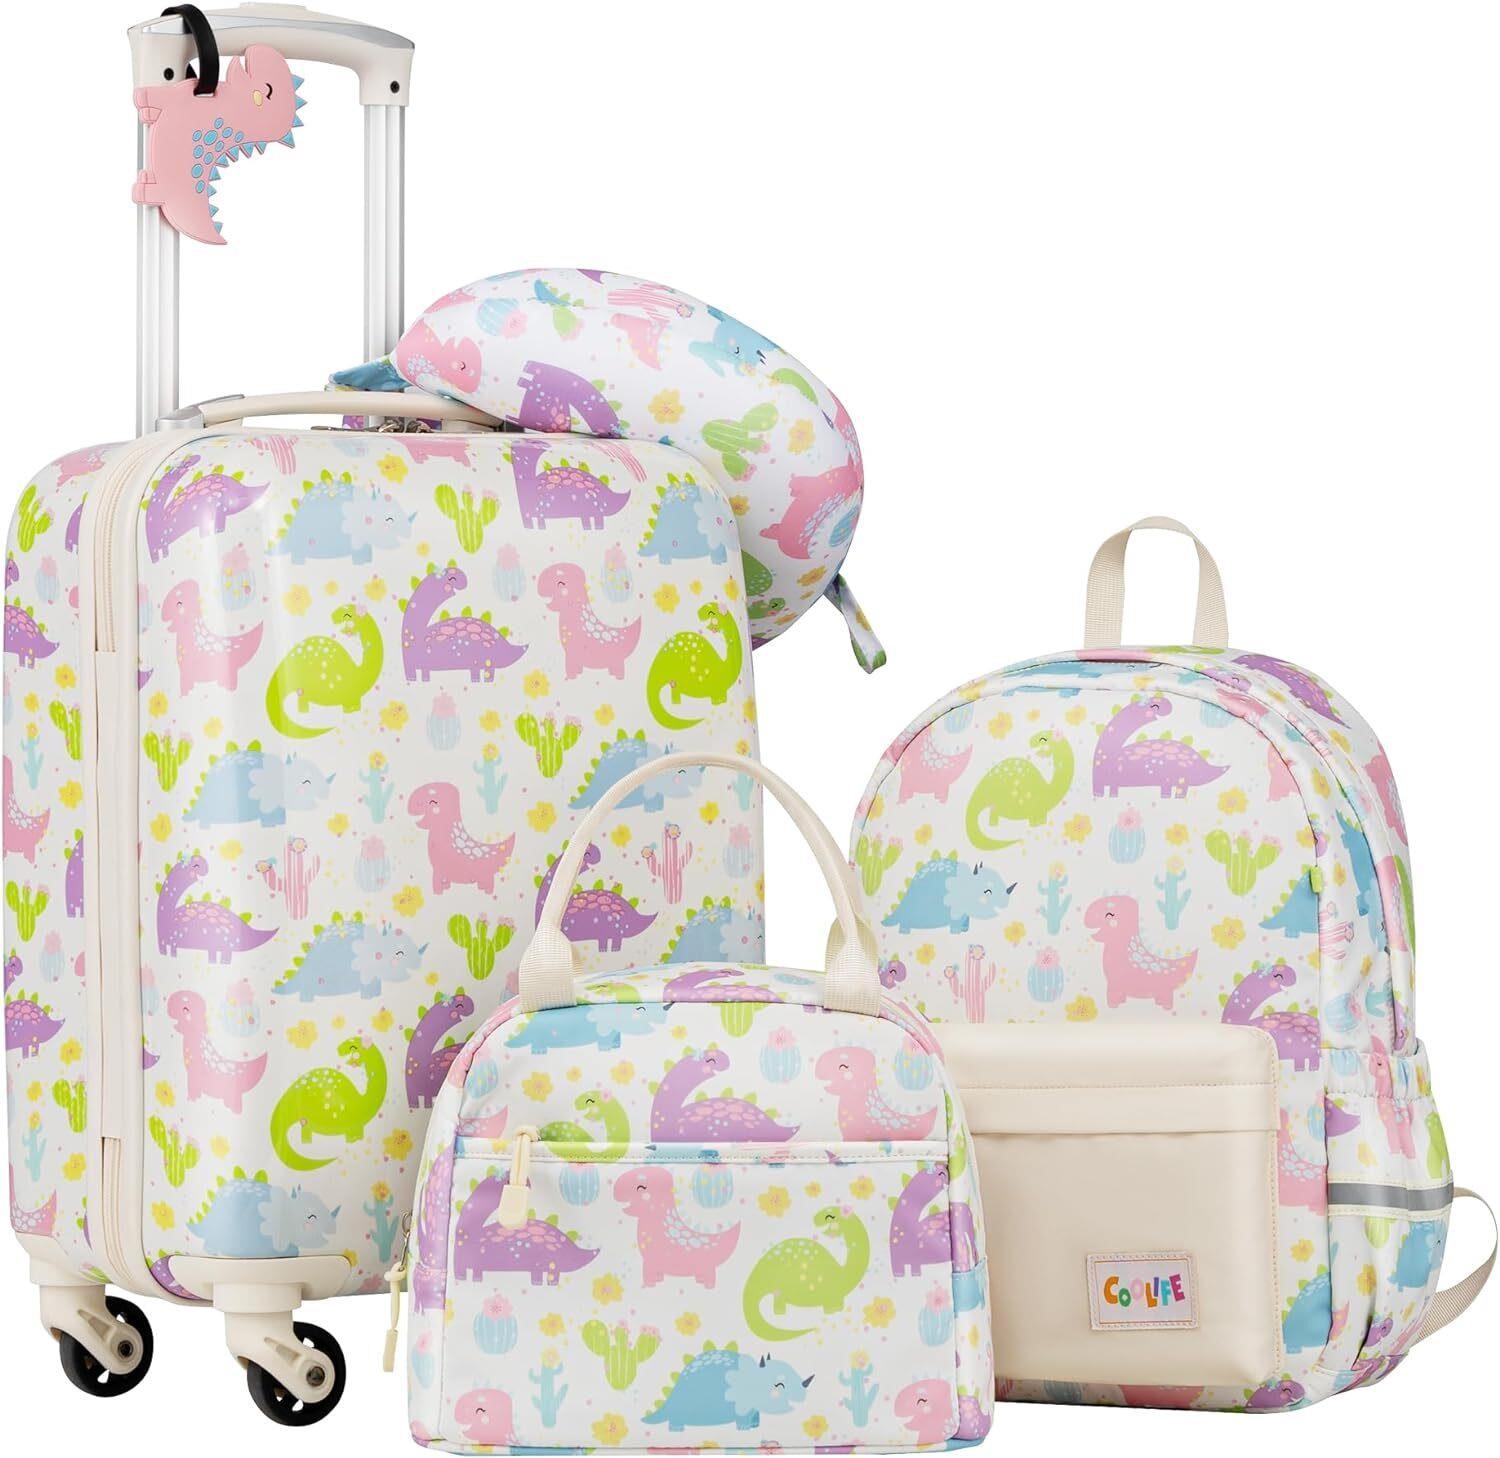 Coolife Kids Luggage 5pc Dino 16 Carry-On